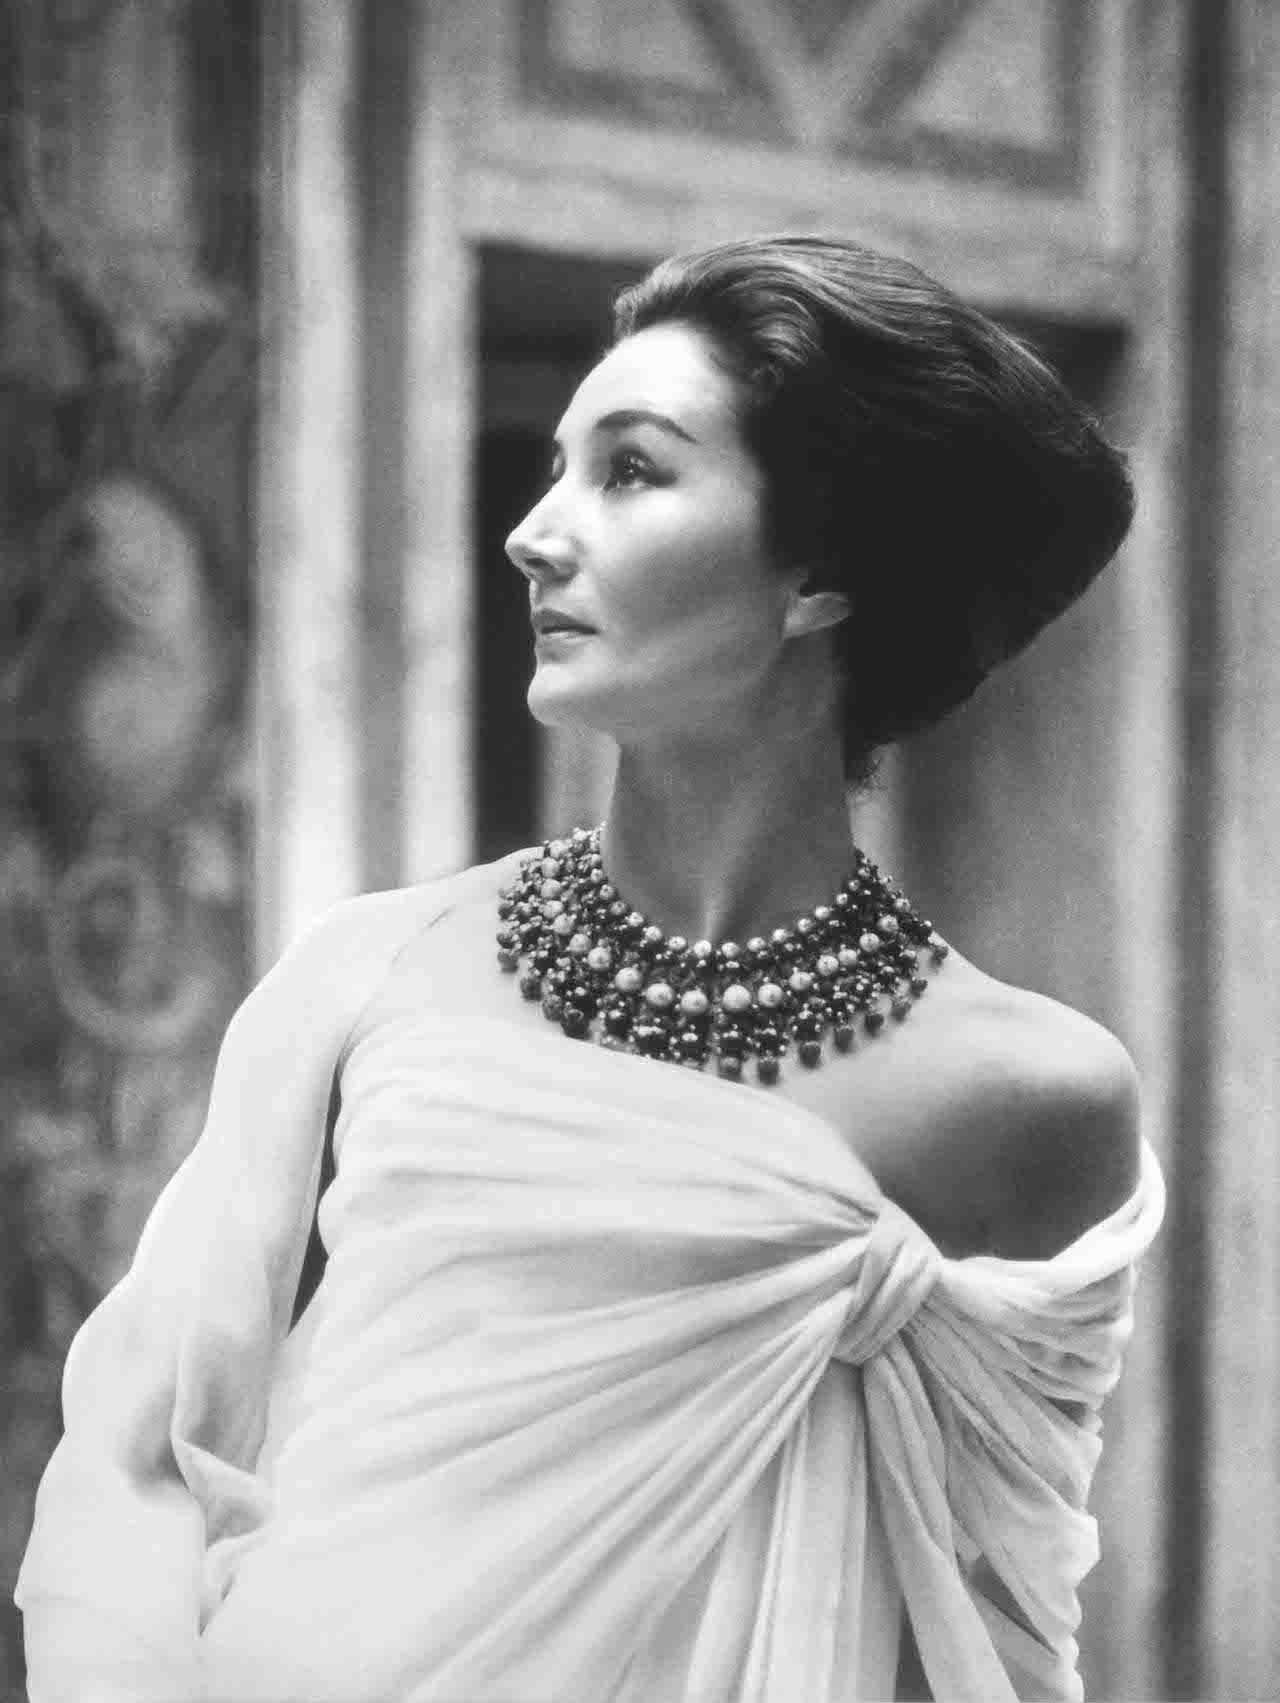 01.Jacqueline de Ribes by Roloff Beny, 1959